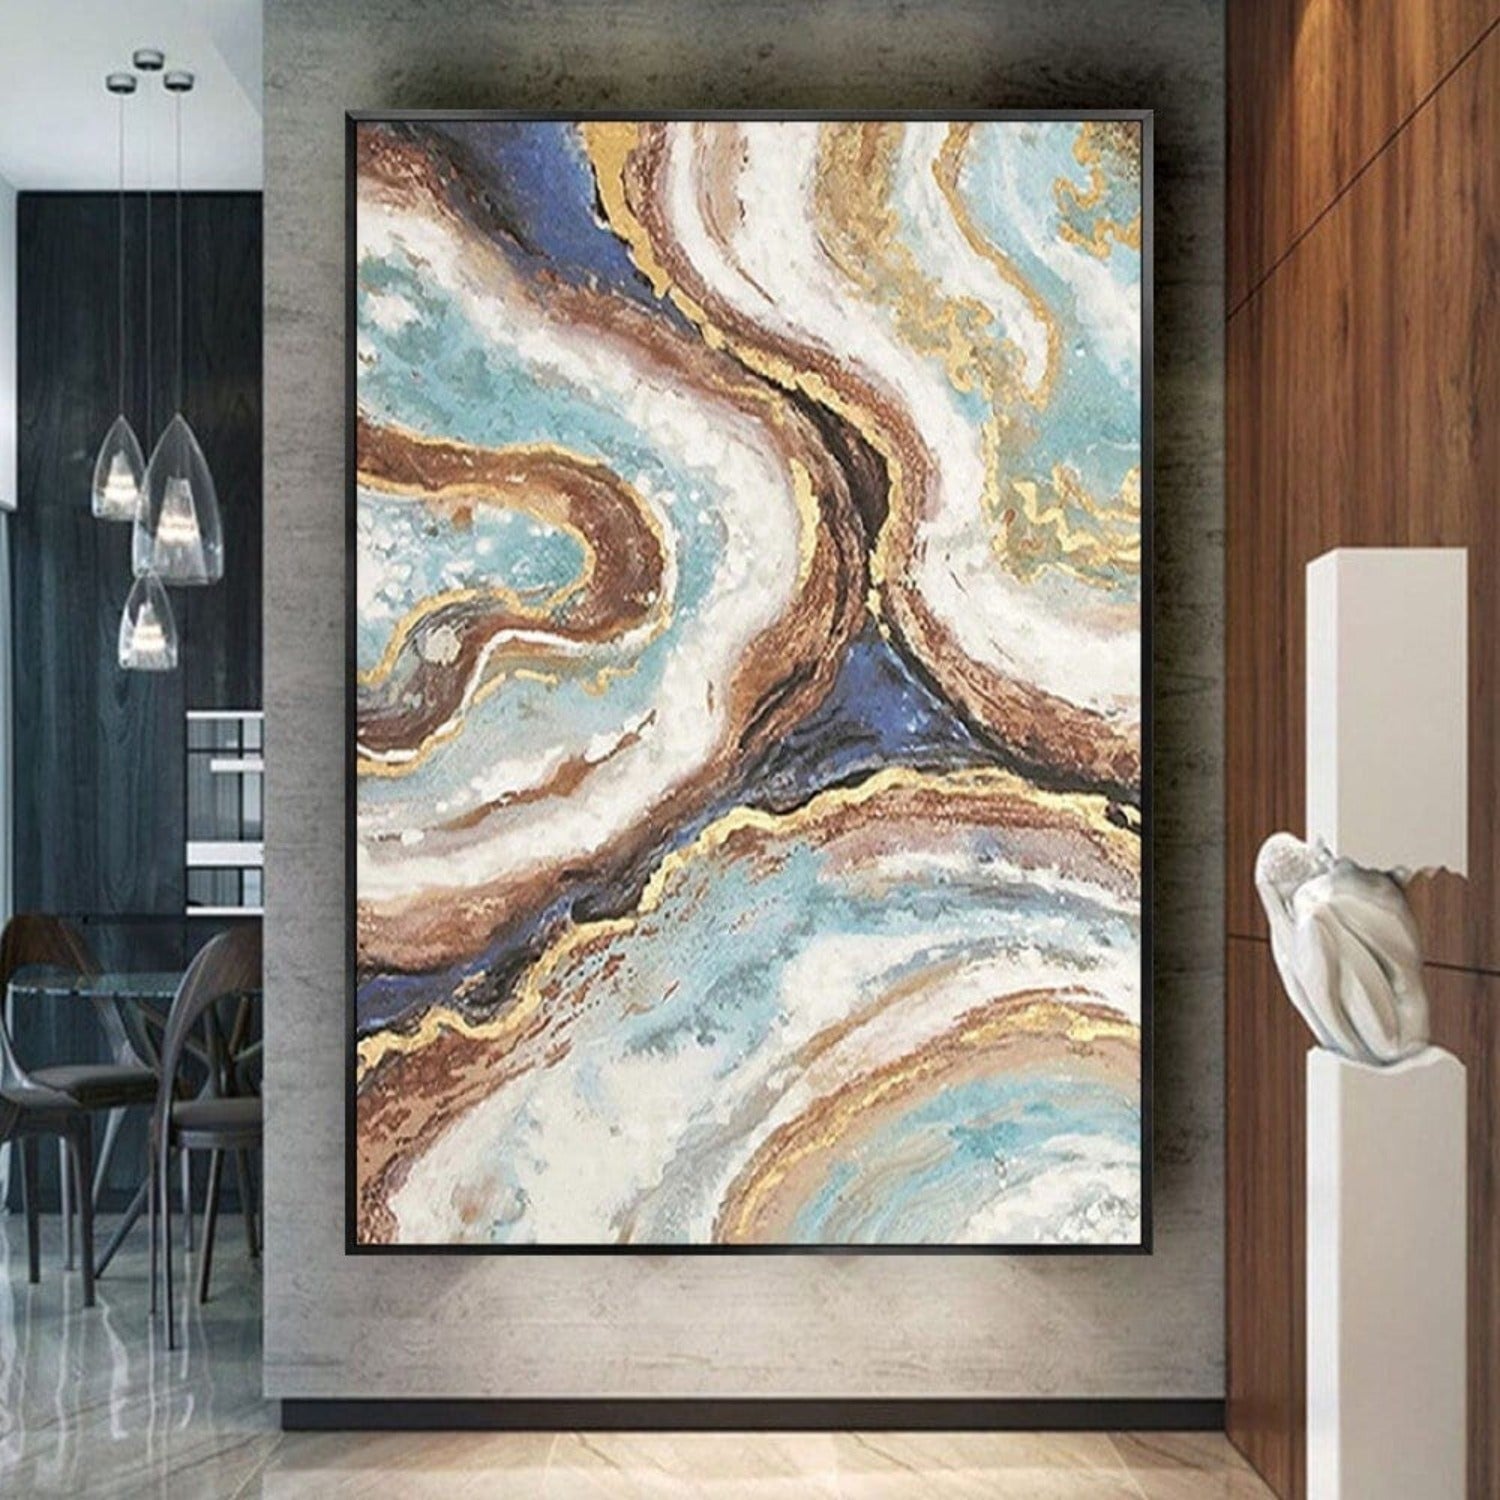 Abstract Gold Foil Fluid Hand Painted Wall Artwork